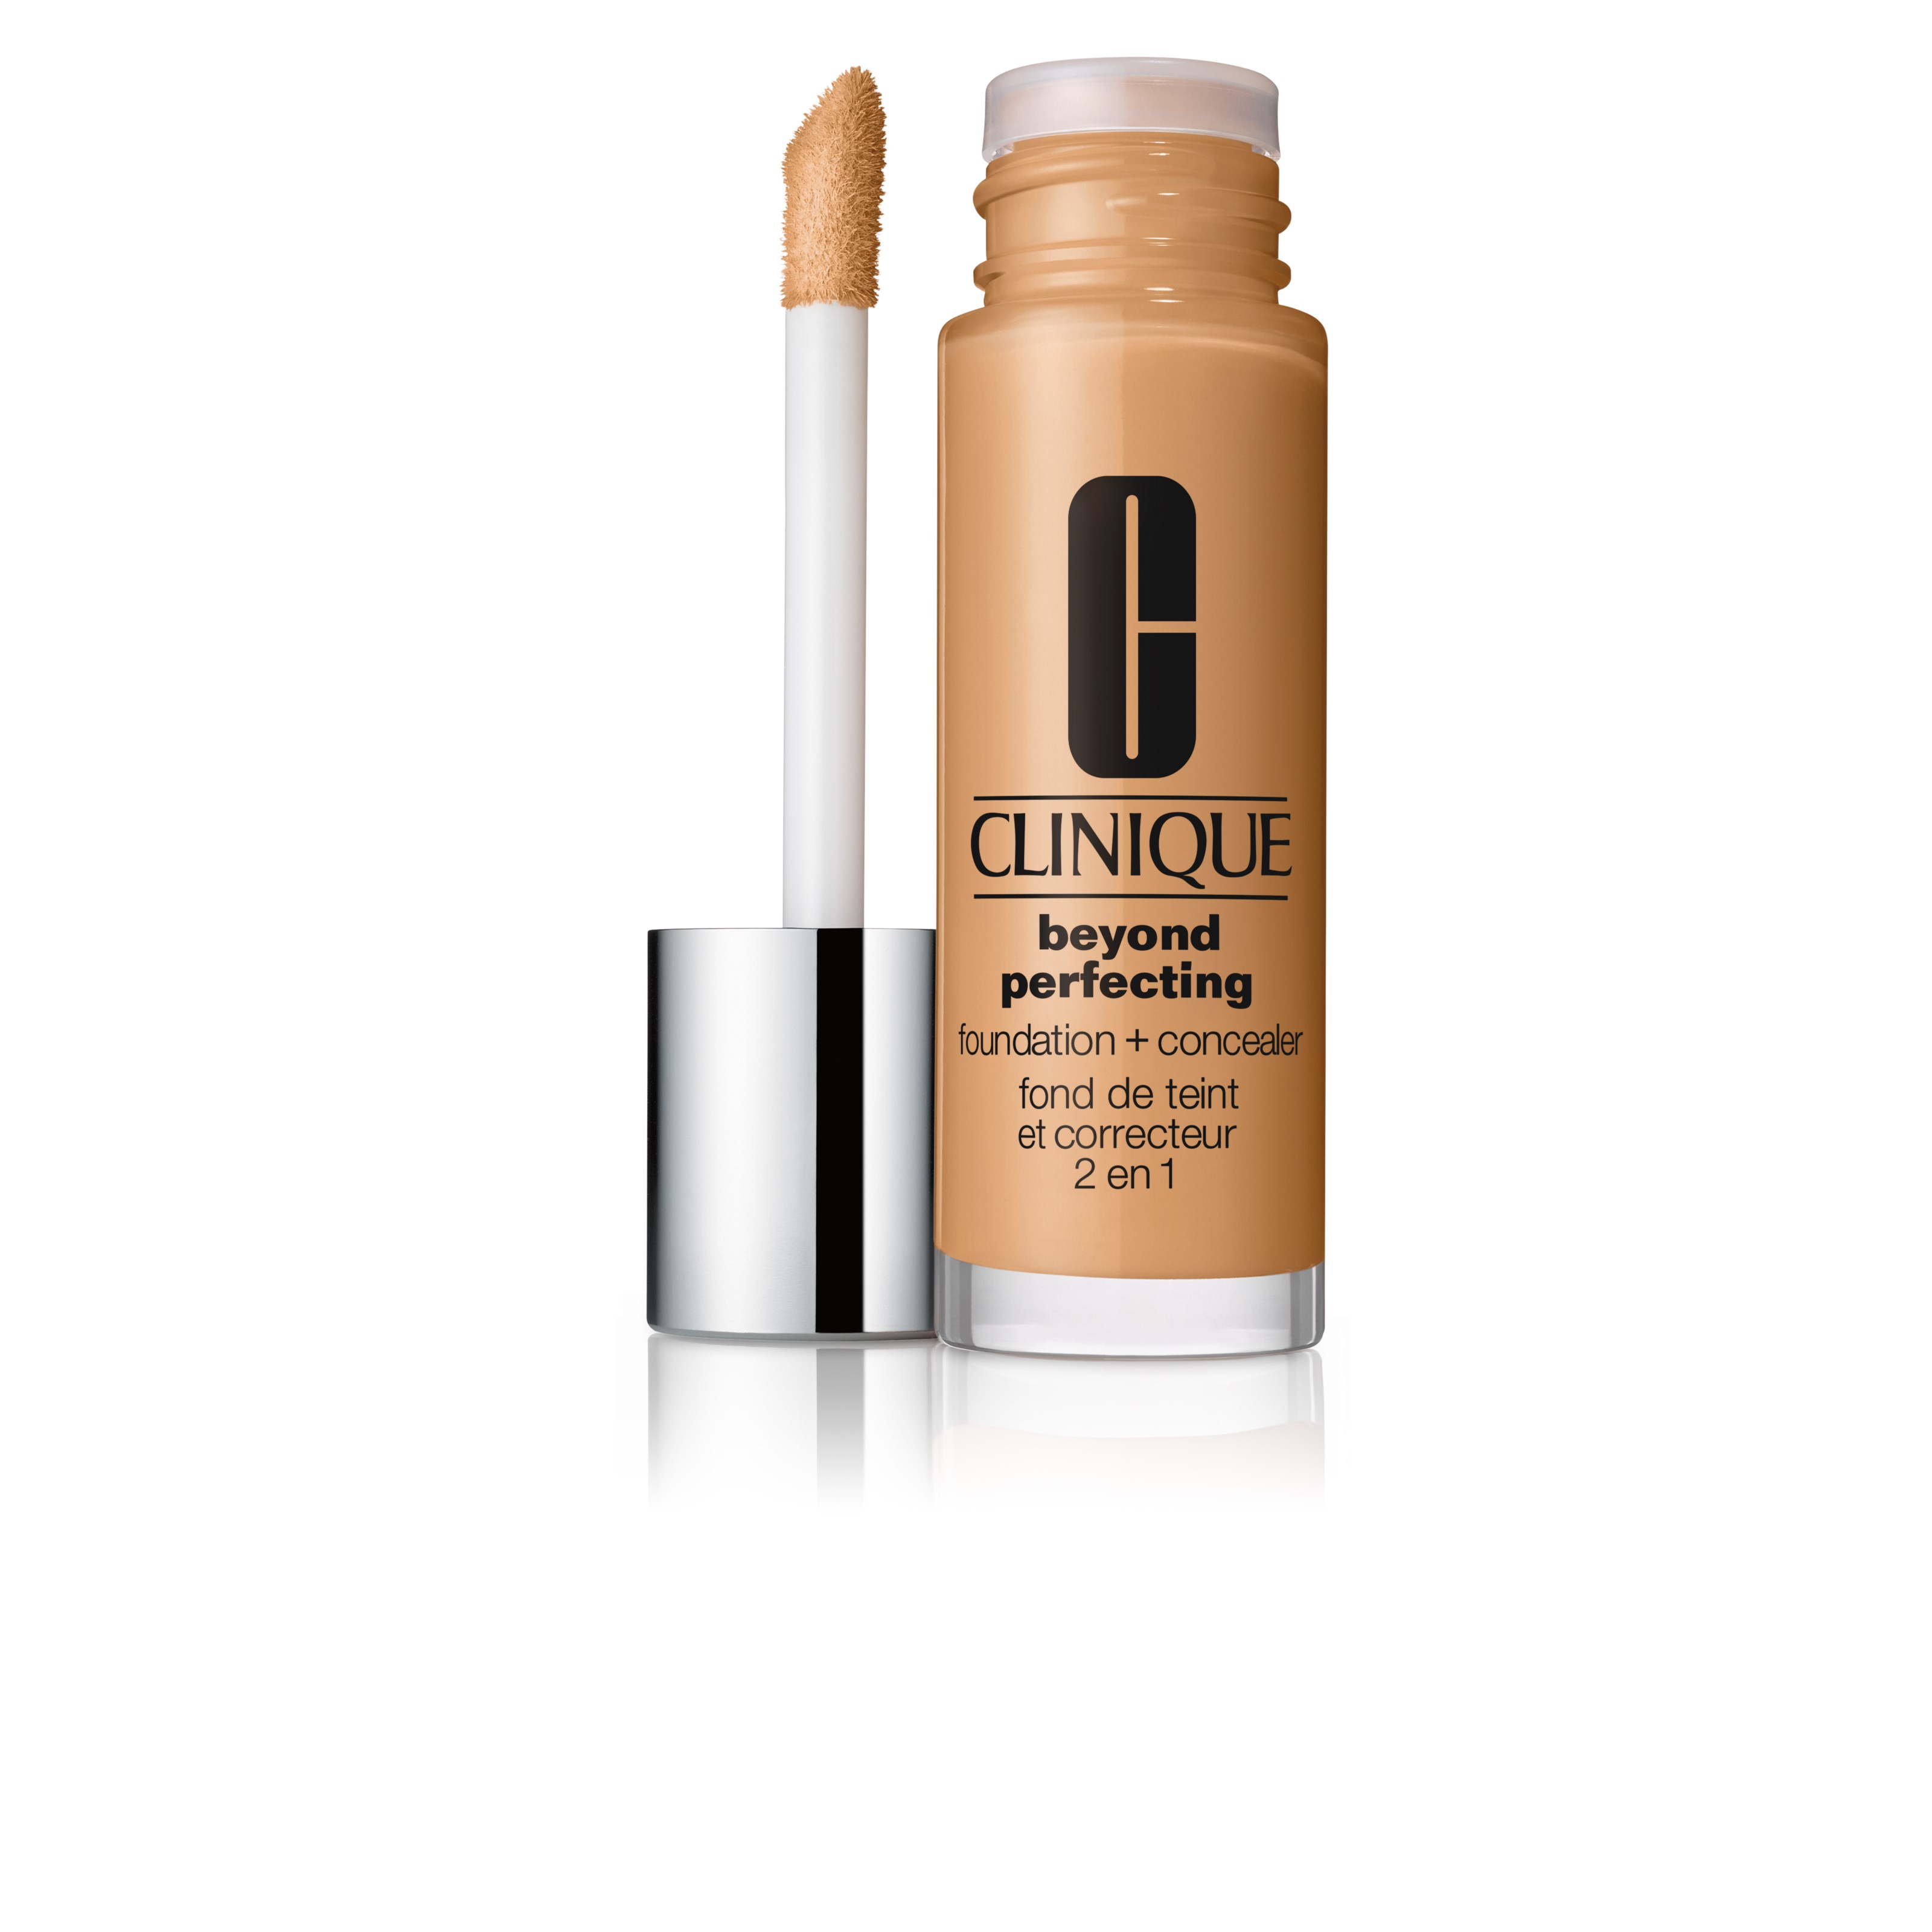 Bilde av Clinique Beyond Perfecting Foundation + Concealer Wn 76 Toasted Wheat